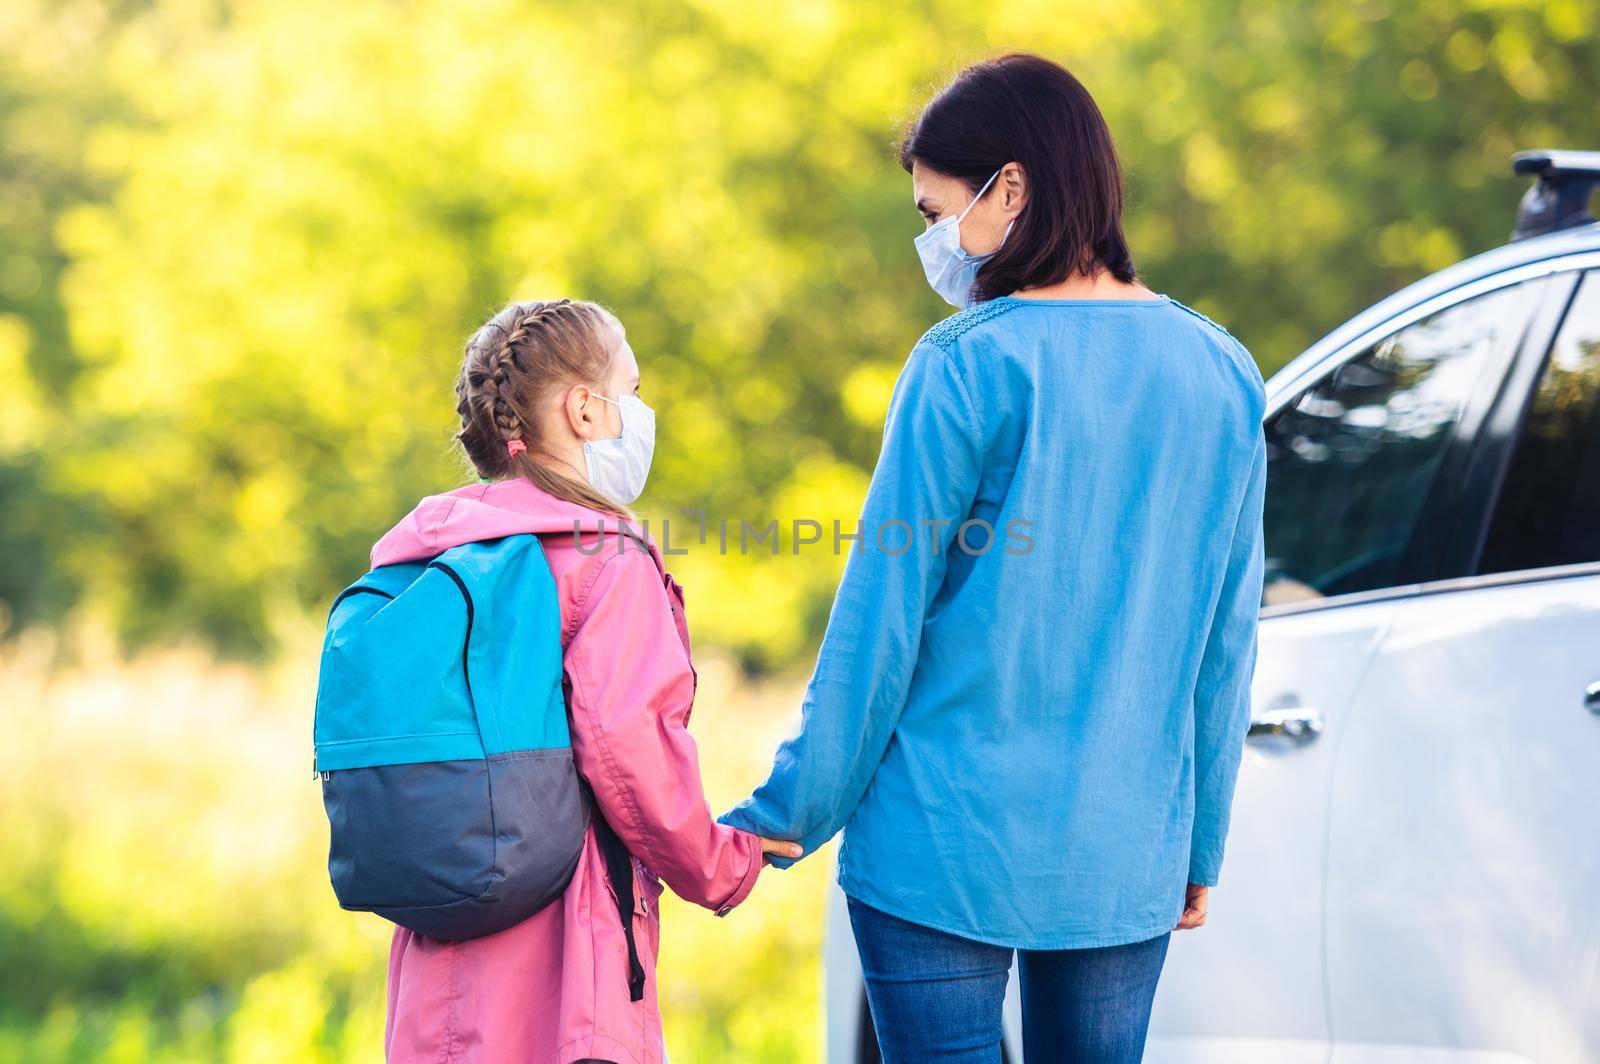 Mother meeting daughter after school during pandemic next to car at sunny day